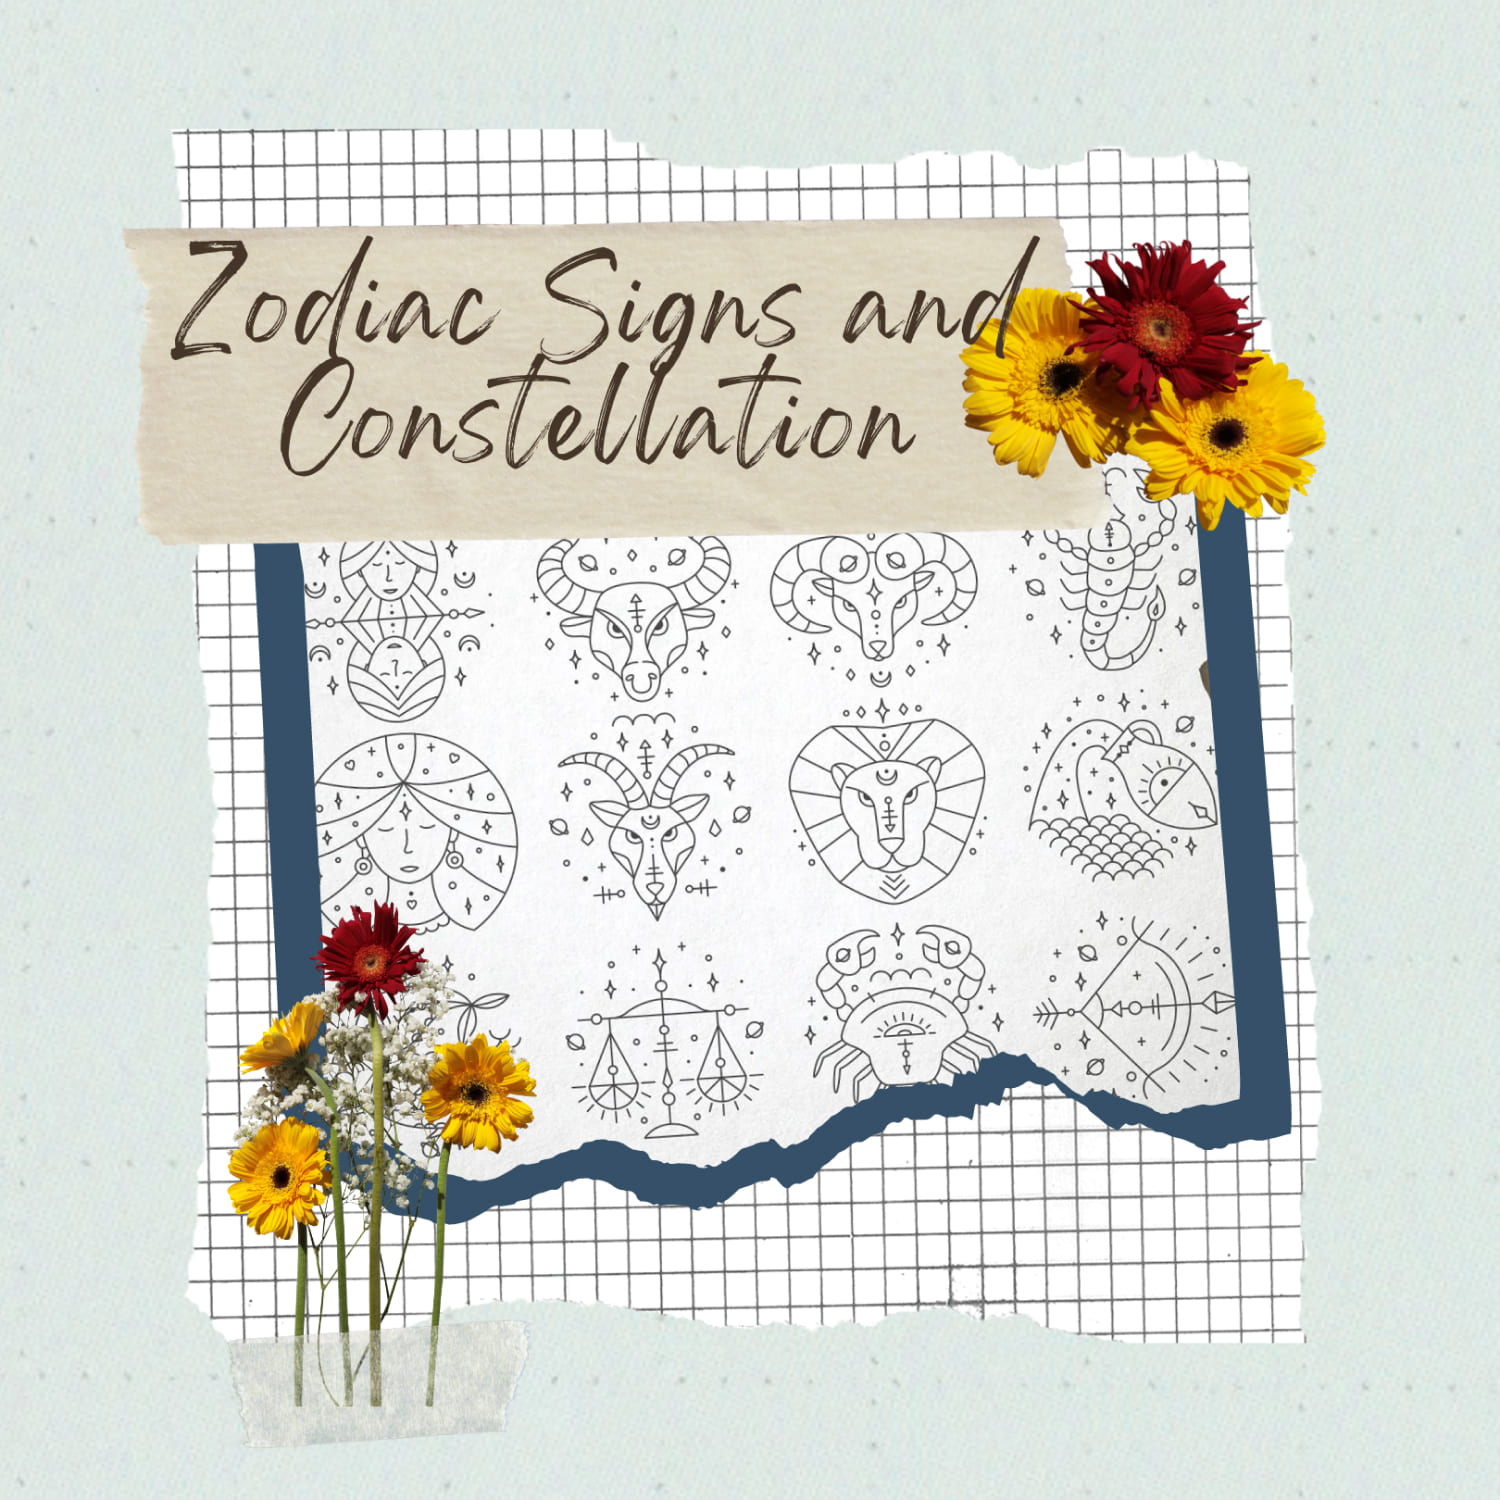 Zodiac Signs and Constellation.